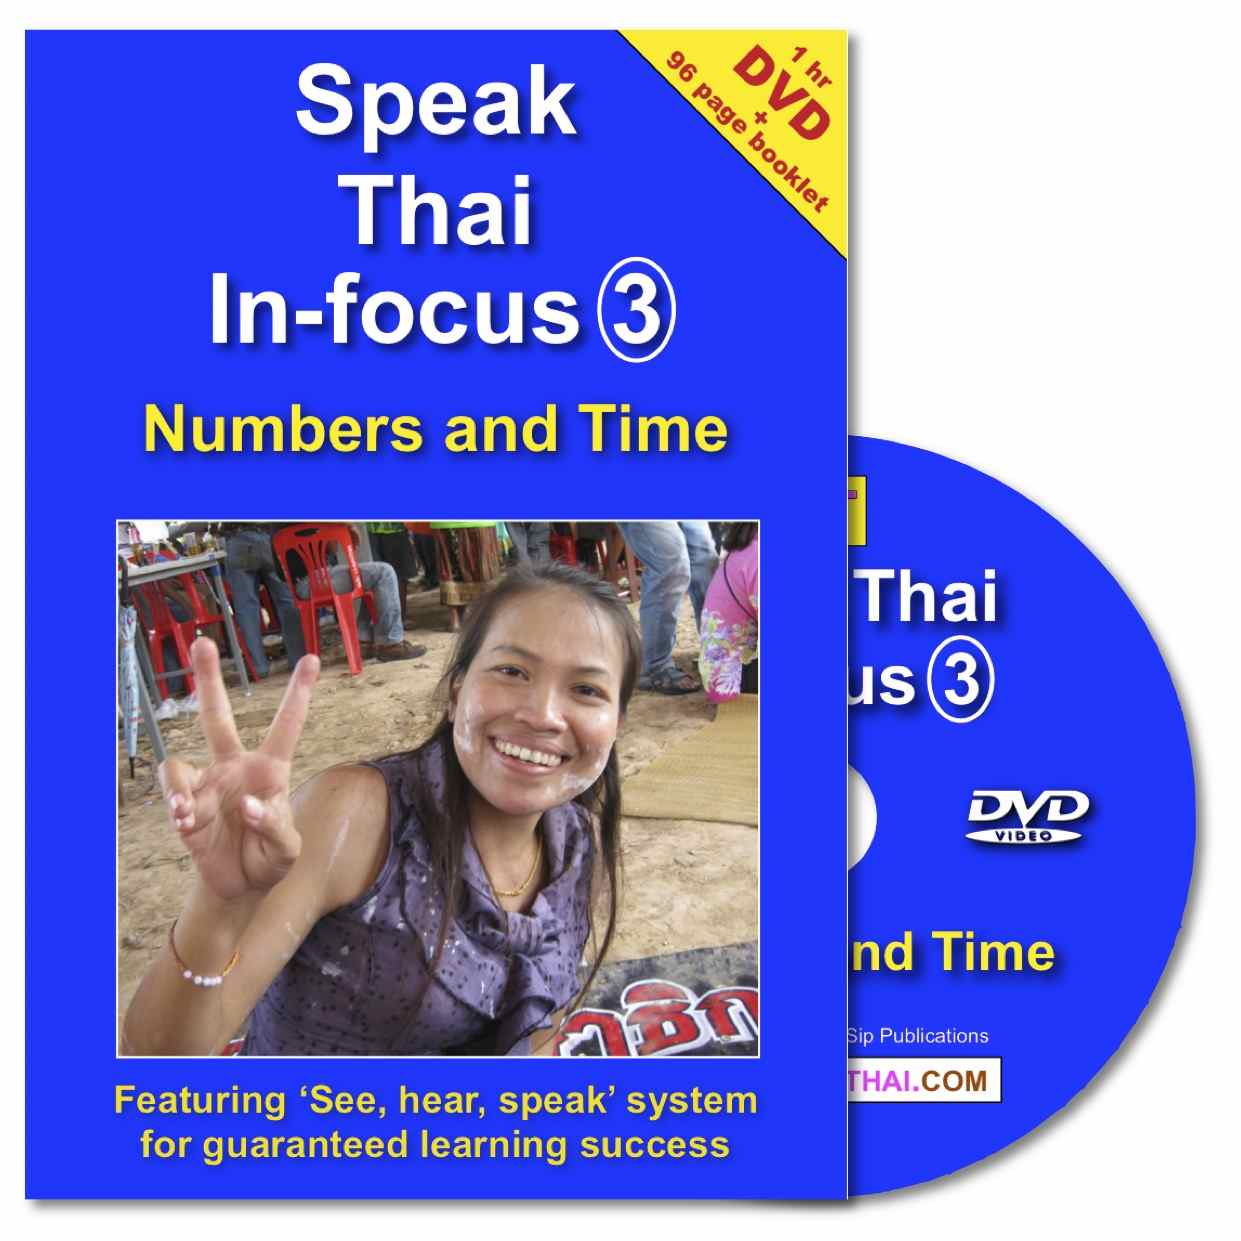 Thai In-focus 3: Numbers and Time 